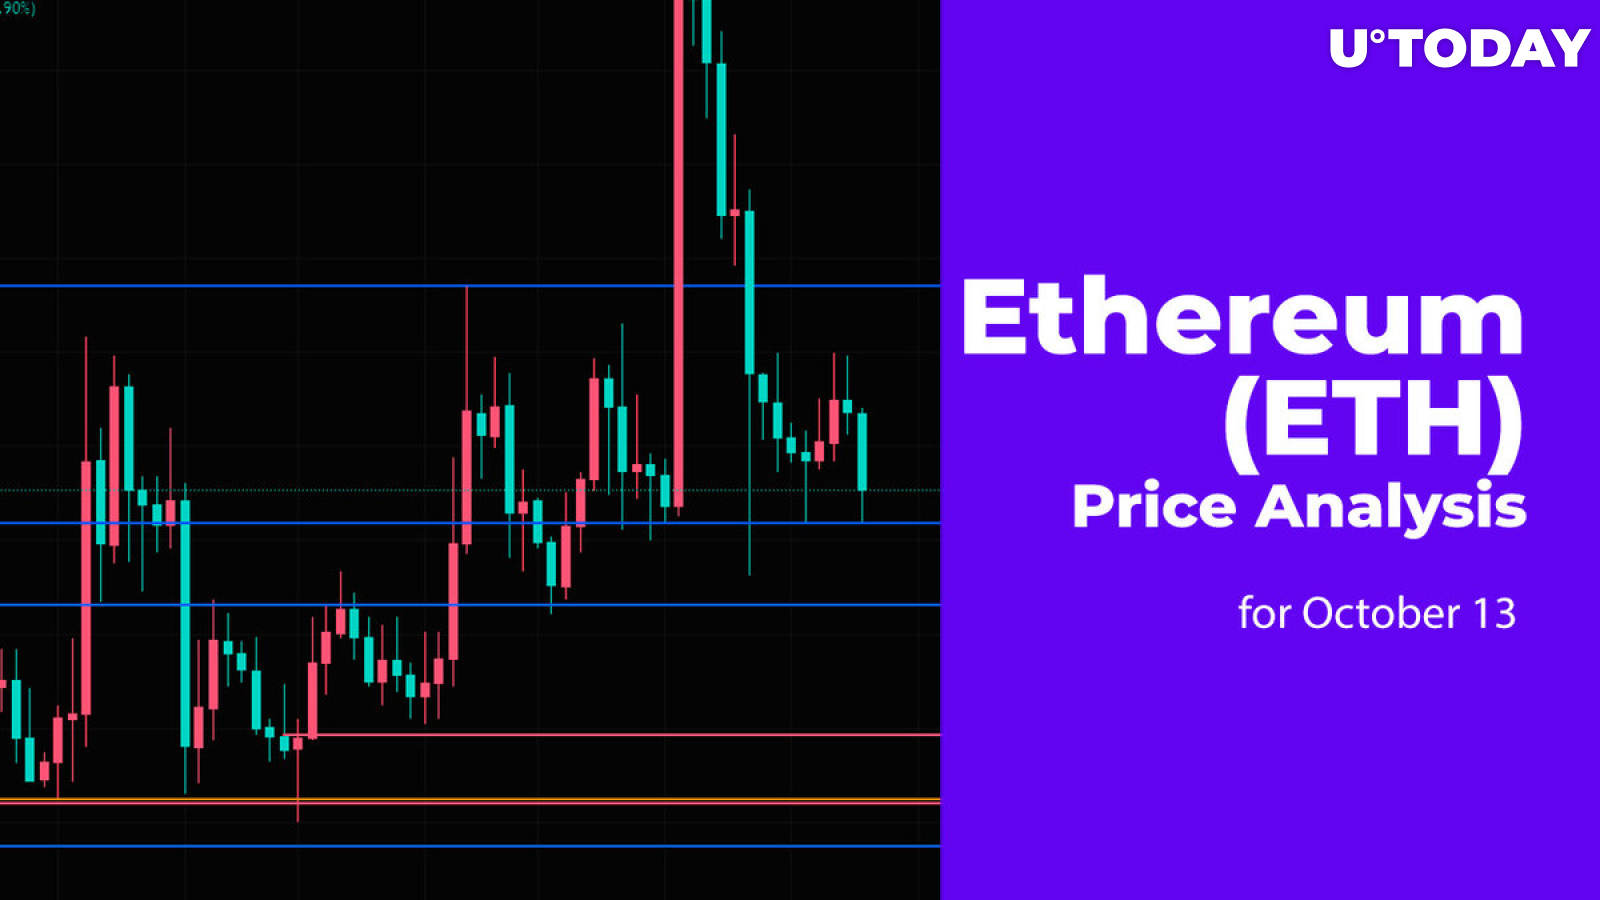 Ethereum (ETH) Price Analysis for October 13